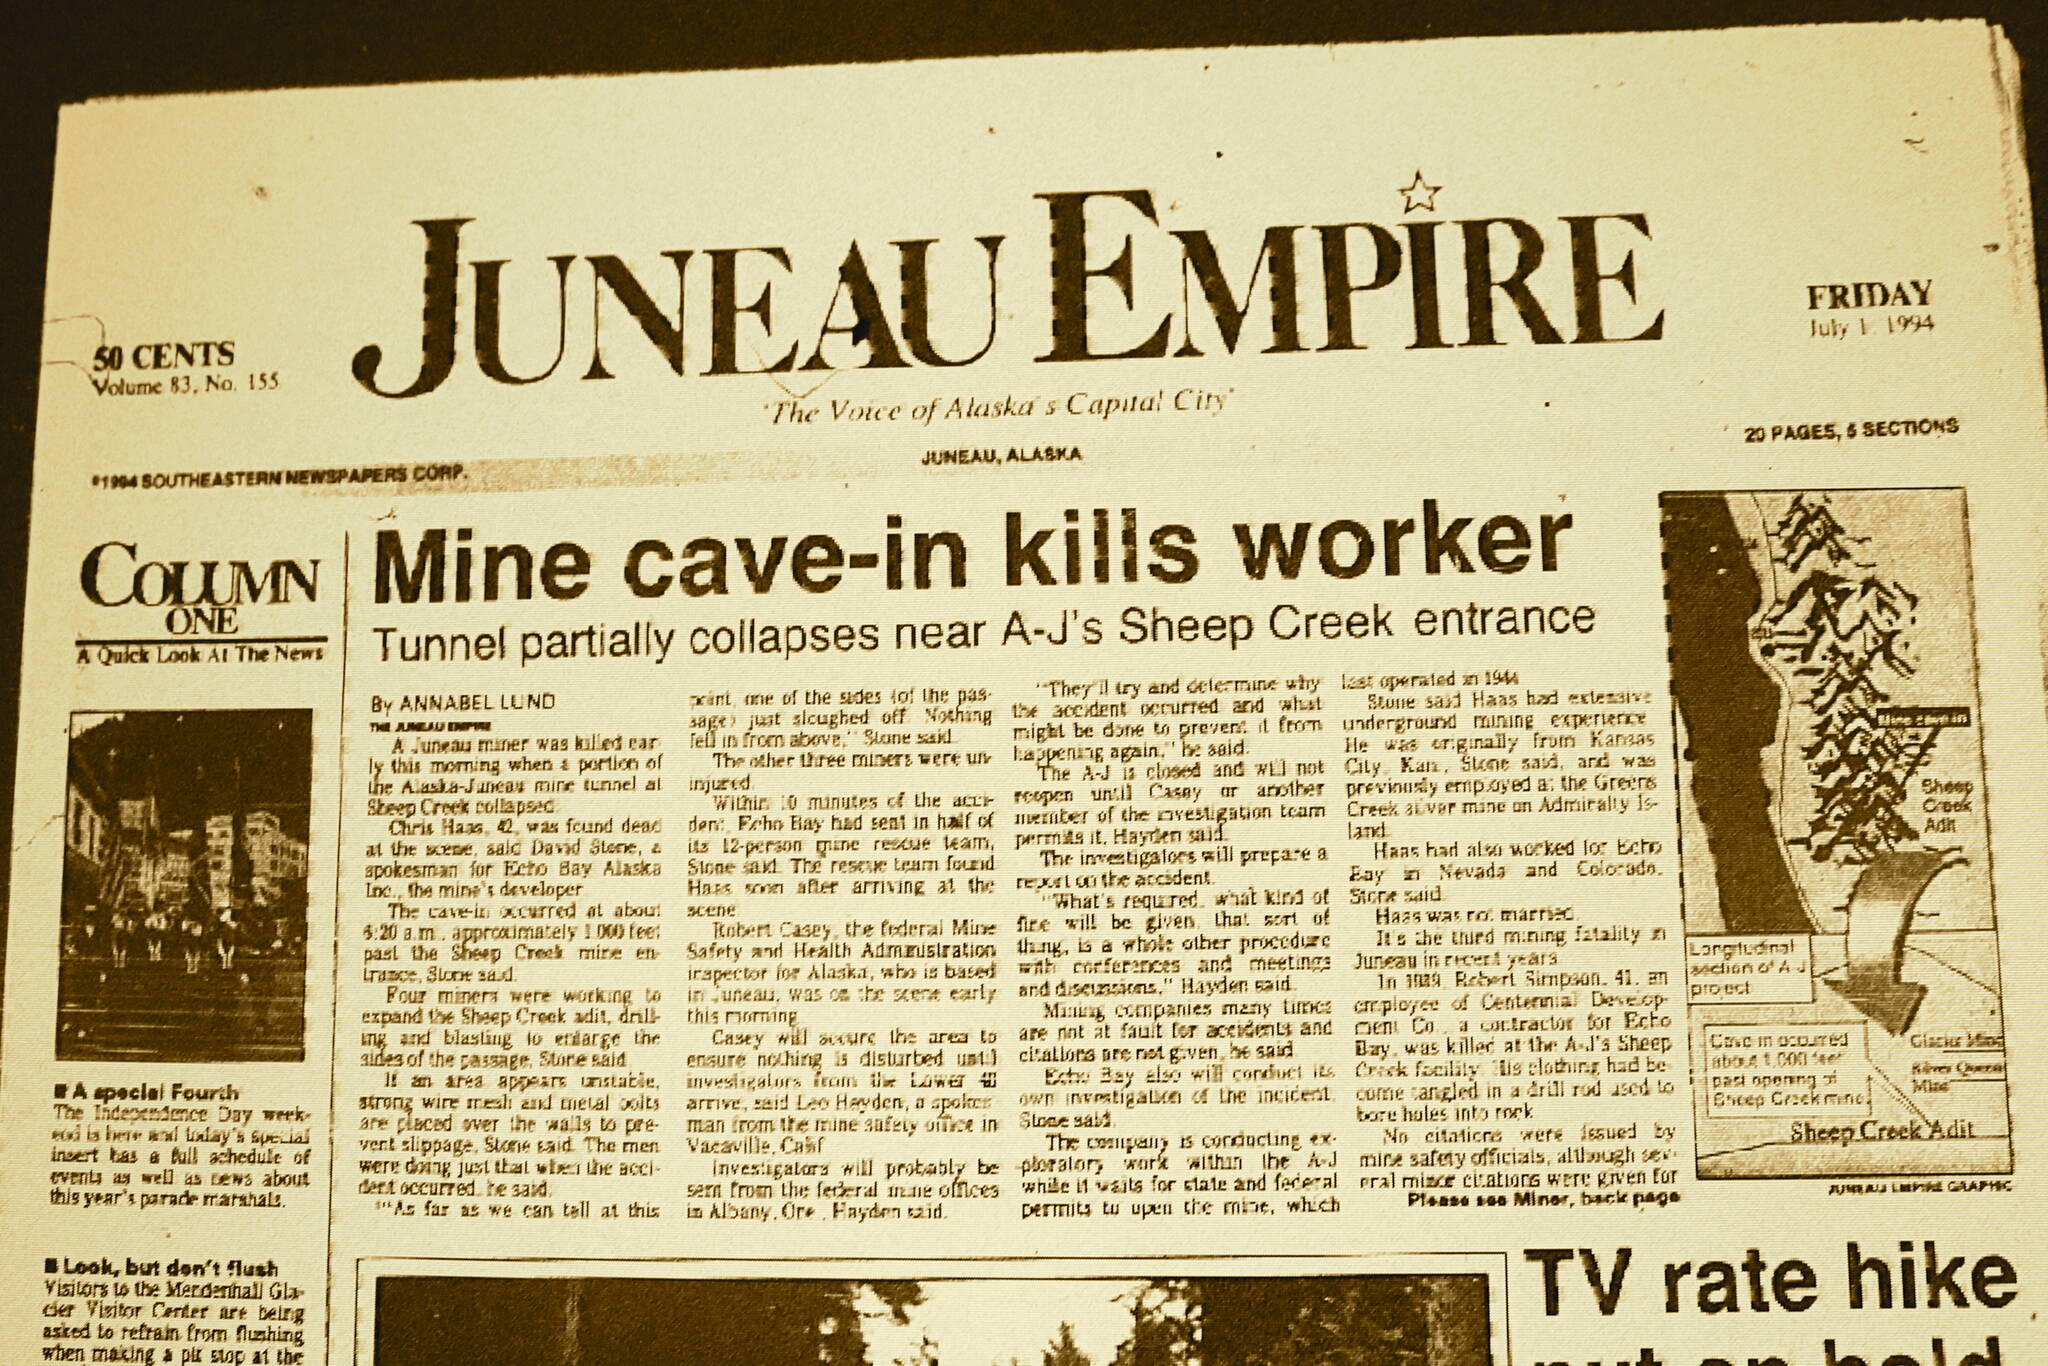 The front page of the Juneau Empire on July 1, 1994. (Mark Sabbatini / Juneau Empire)